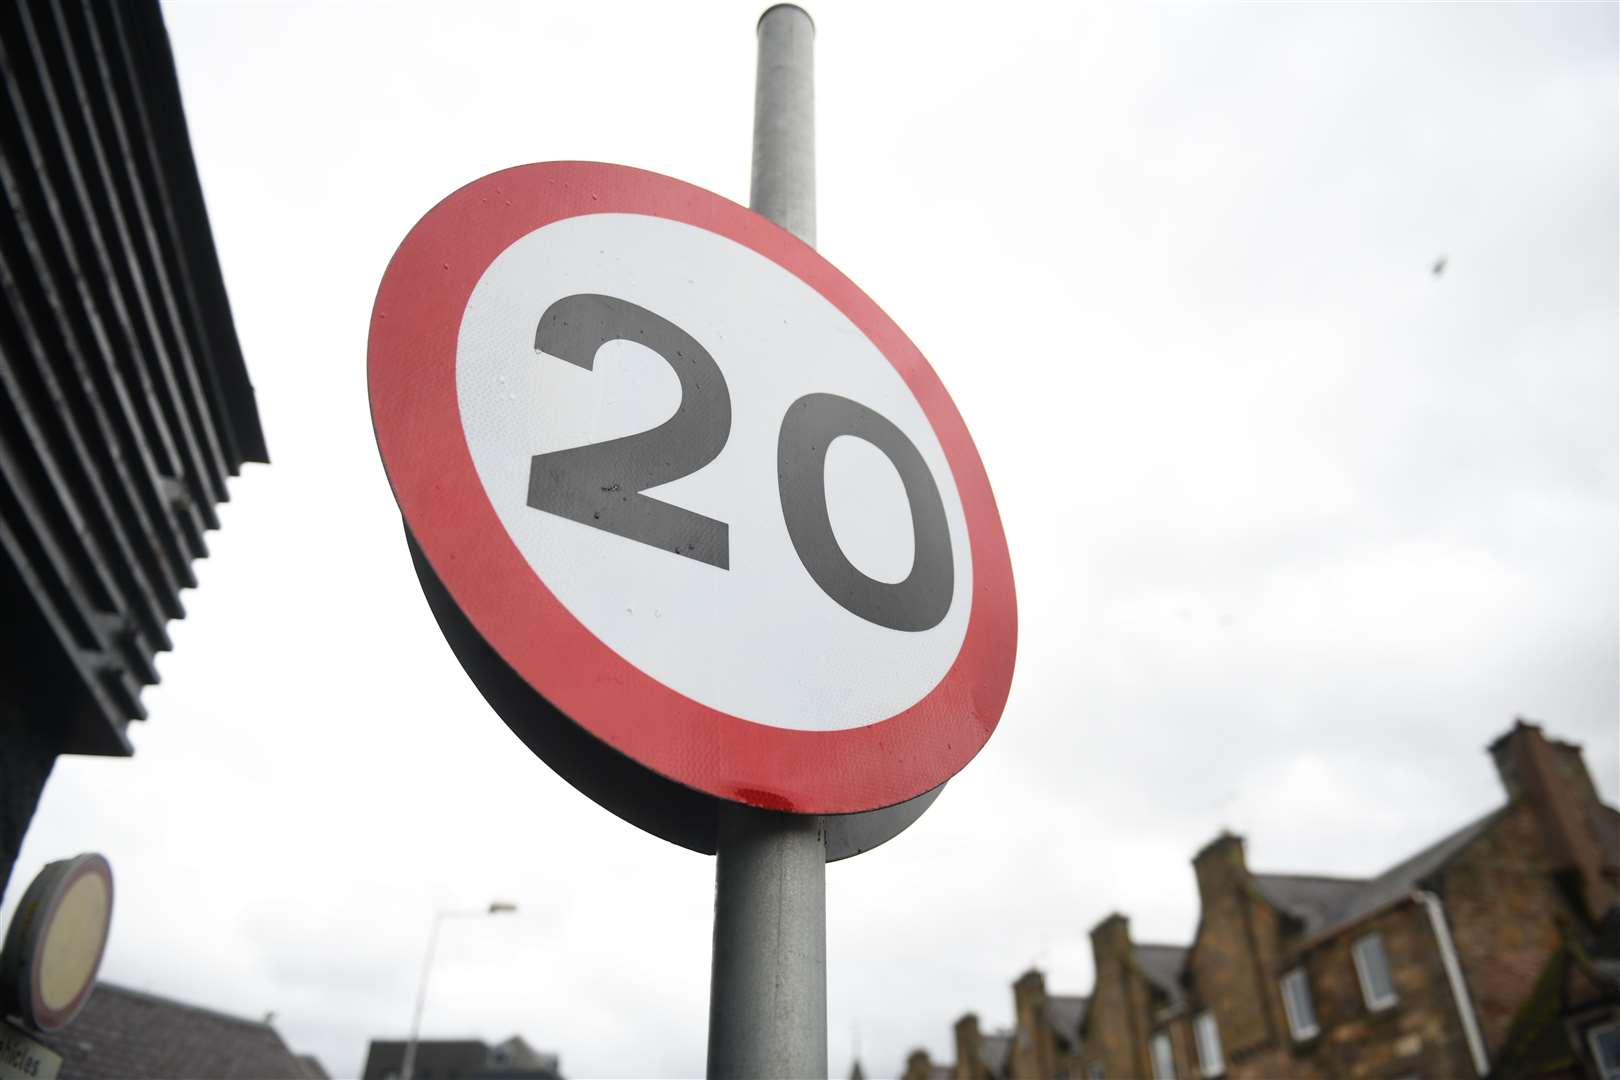 Highland Council has launched a public consultation for the Highland-wide 20mph roll-out project.